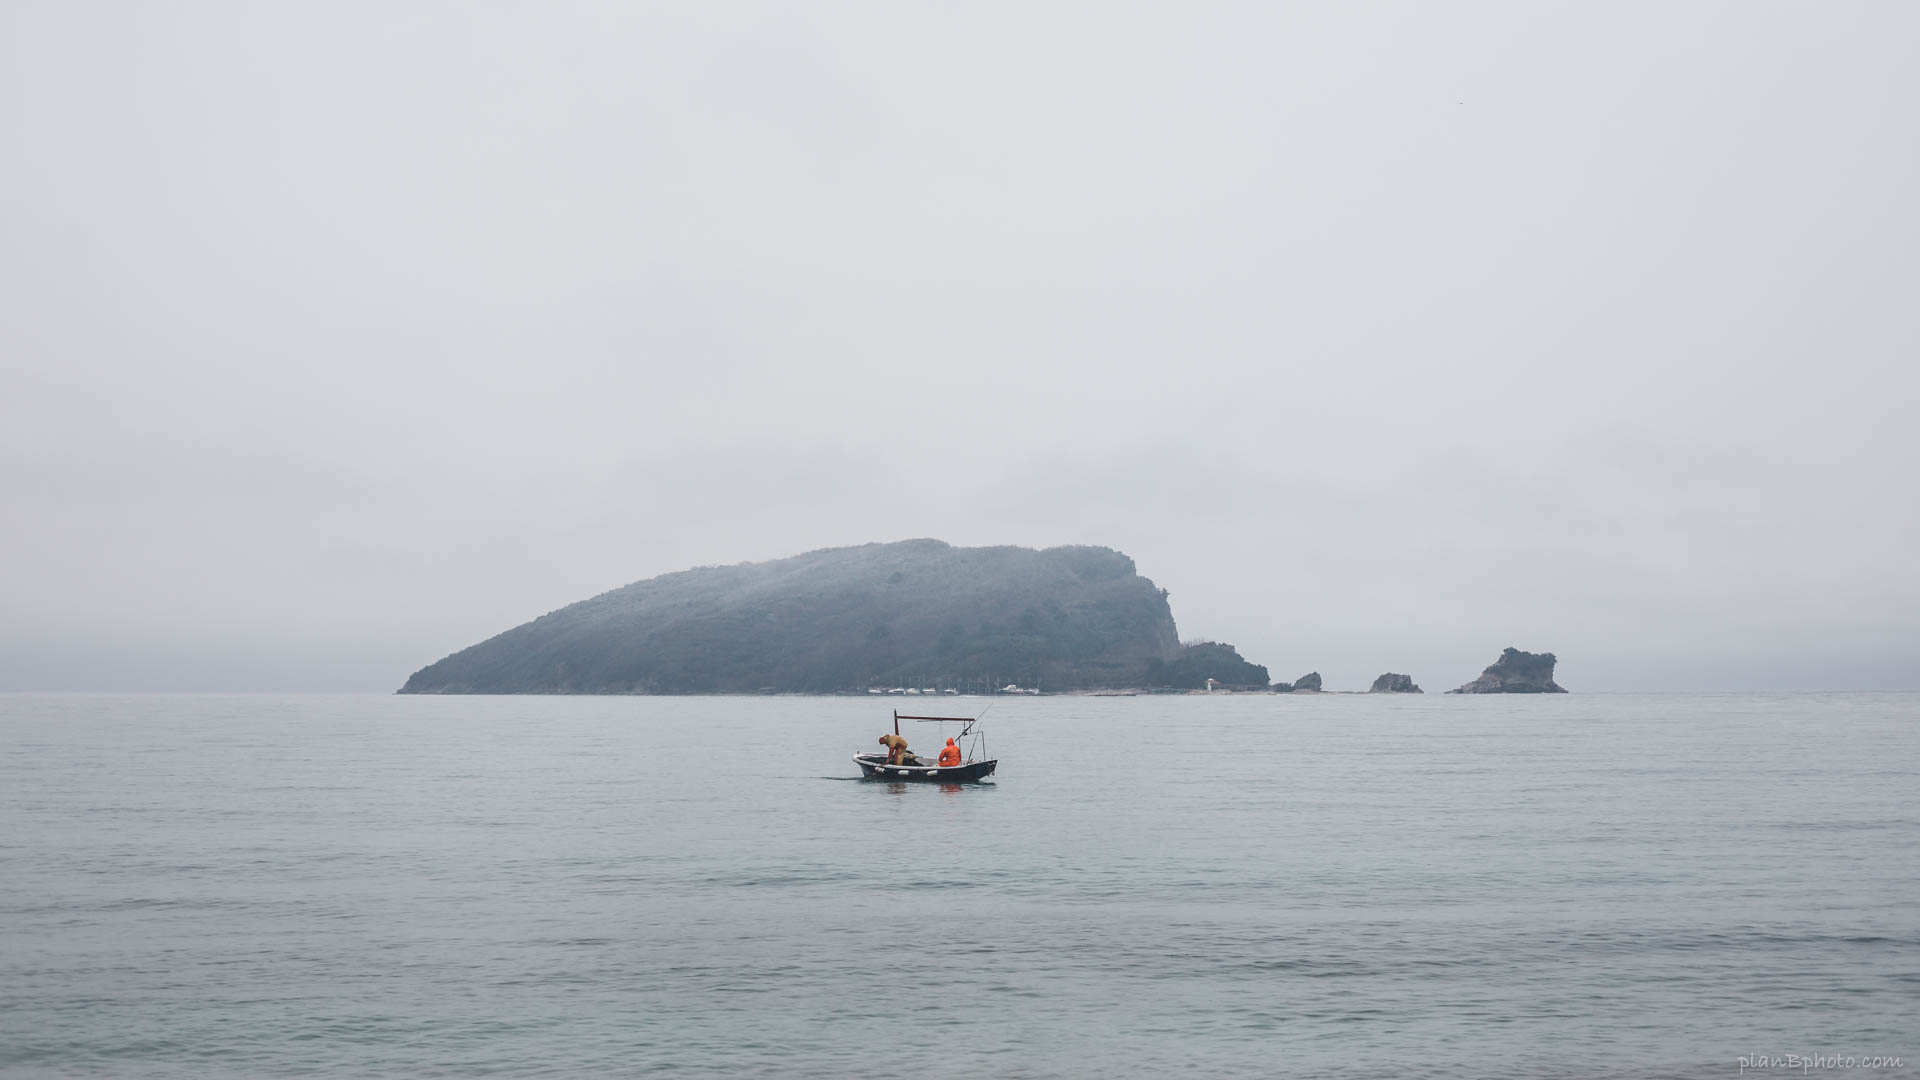 Two fisherman at sea in a boat near an island in foggy weather